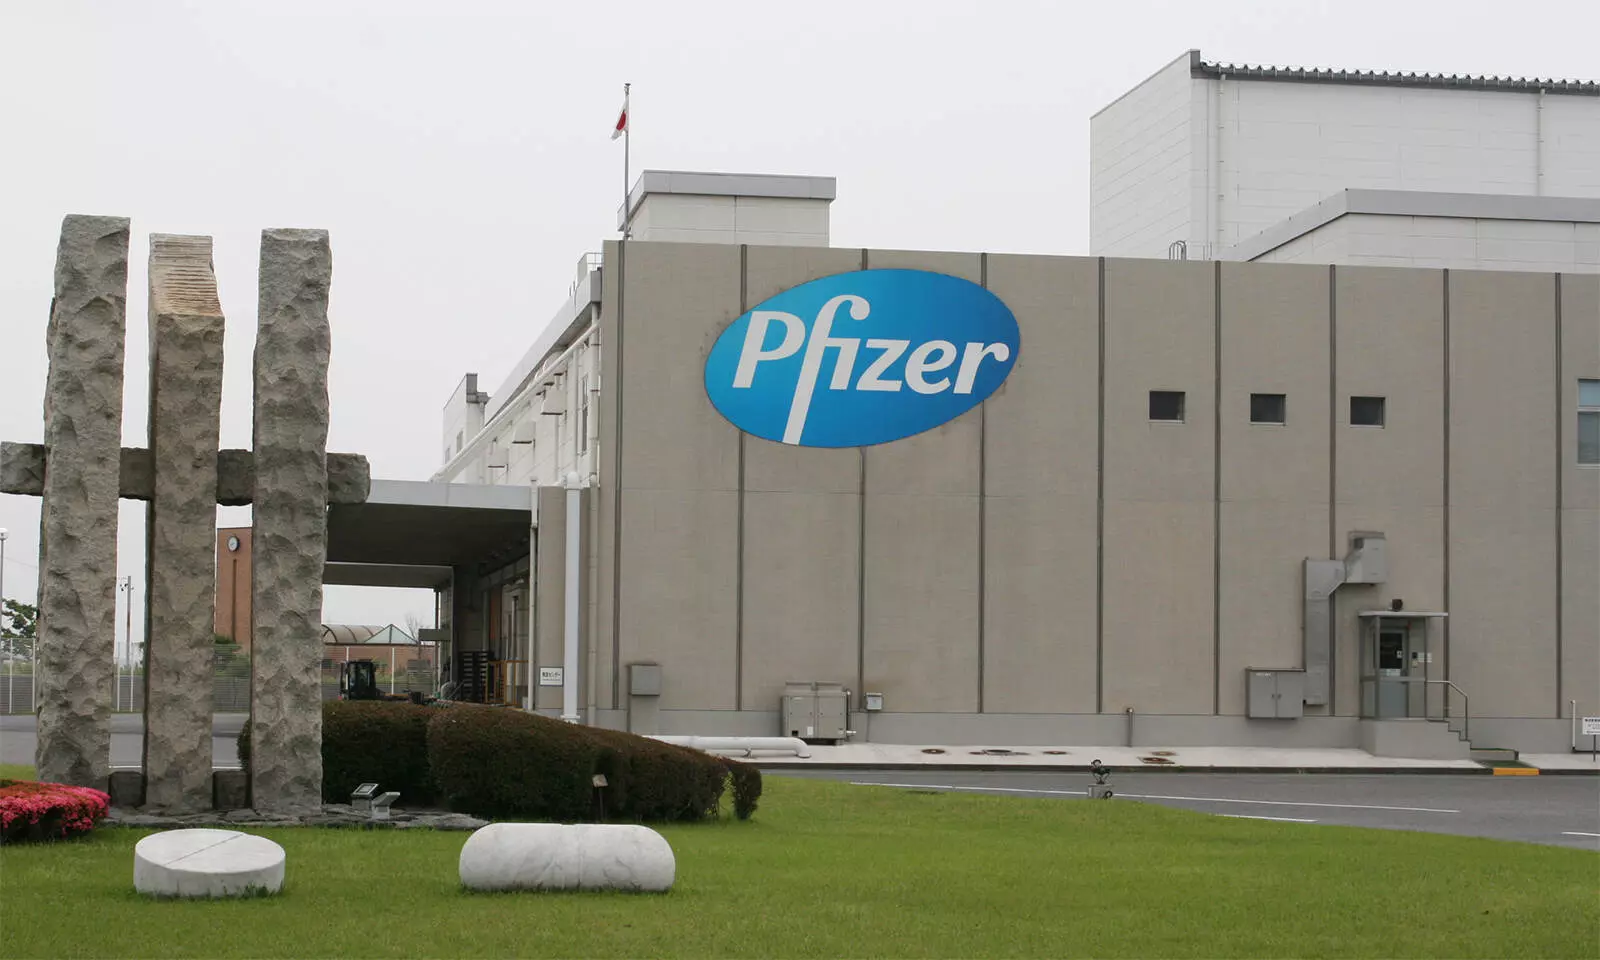 USFDA to soon authorize Pfizer COVID booster shot for children aged 5 to 11: NYT